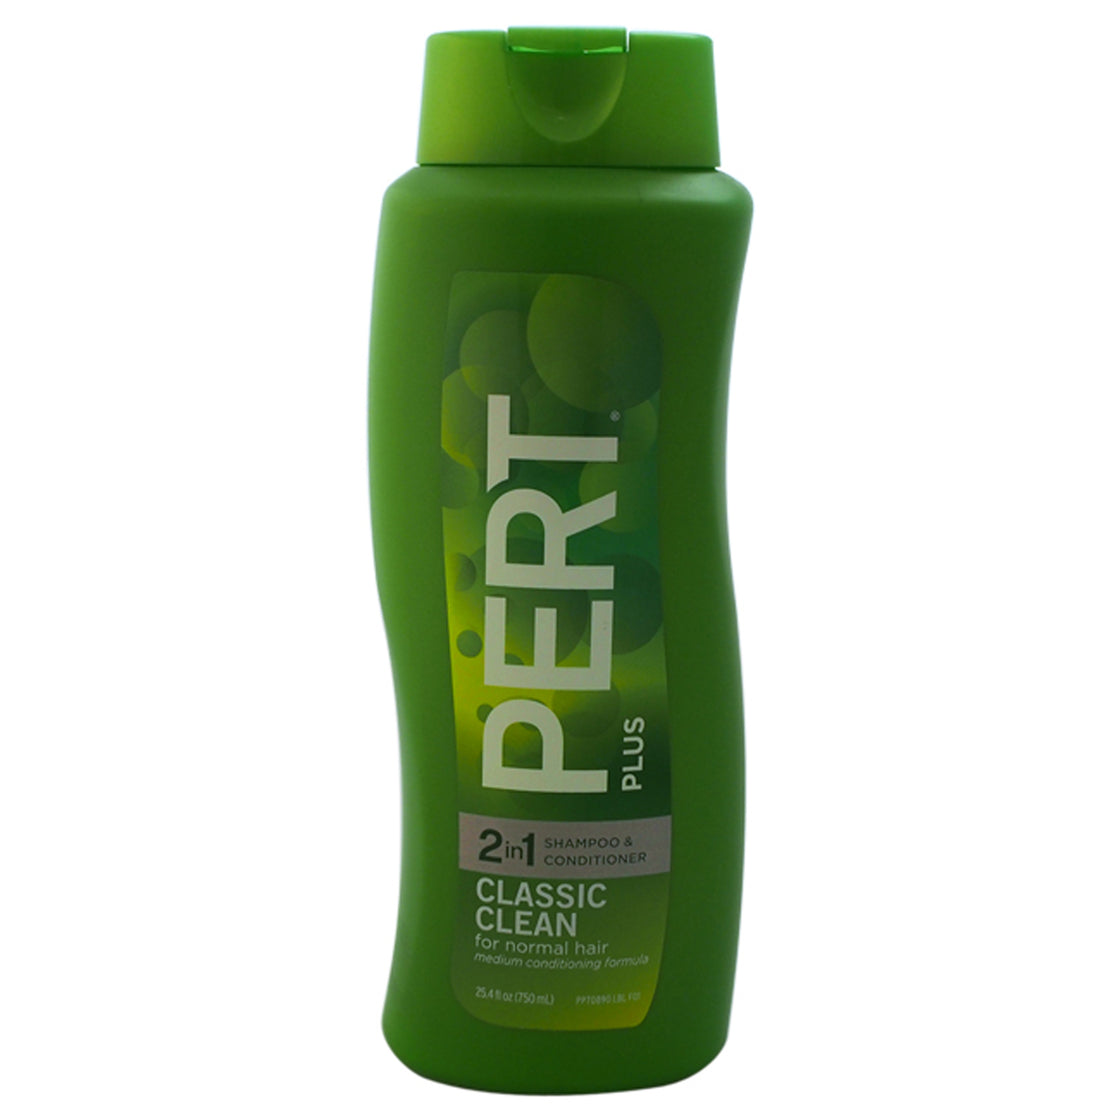 Classic clean 2 in 1 Shampoo and Conditioner For Normal Hair by Pert for Unisex - 25.4 oz Shampoo and Conditioner